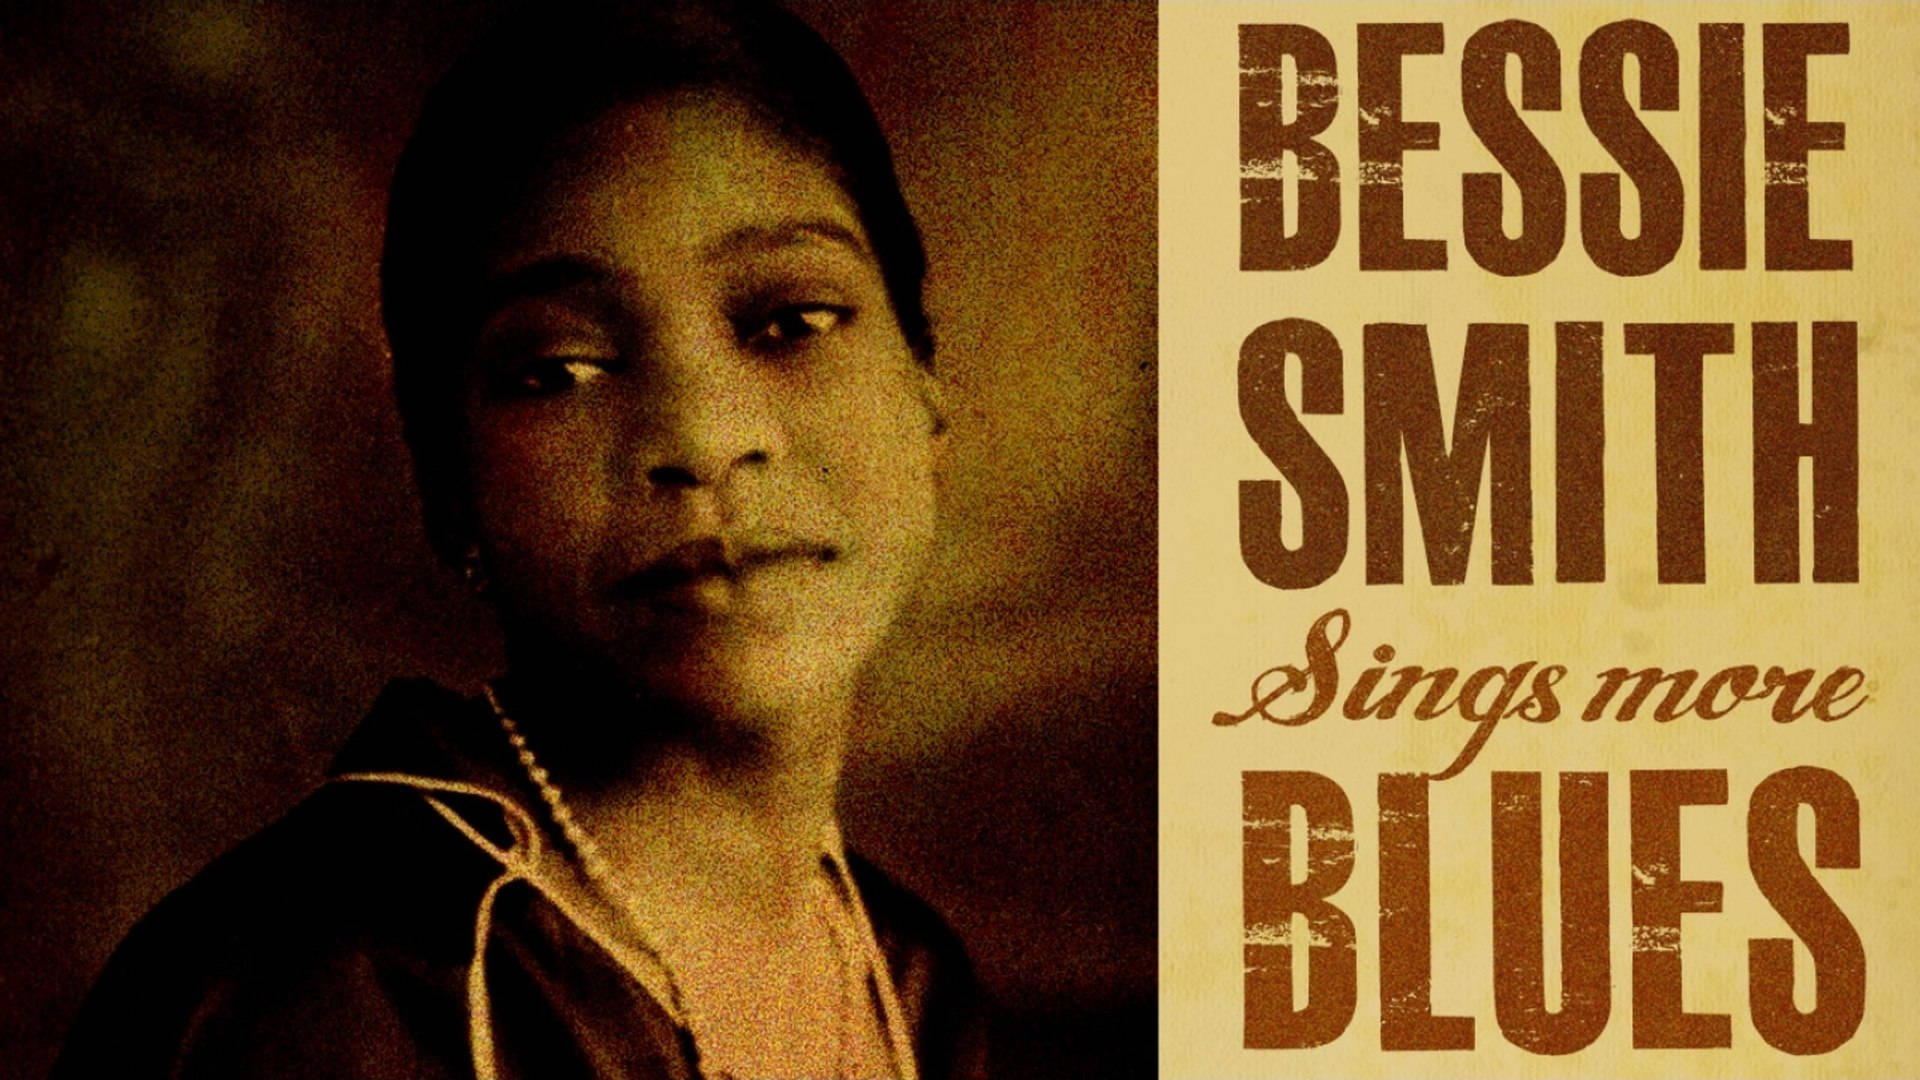 Bessie Smith Sings More Blues Wallpaper